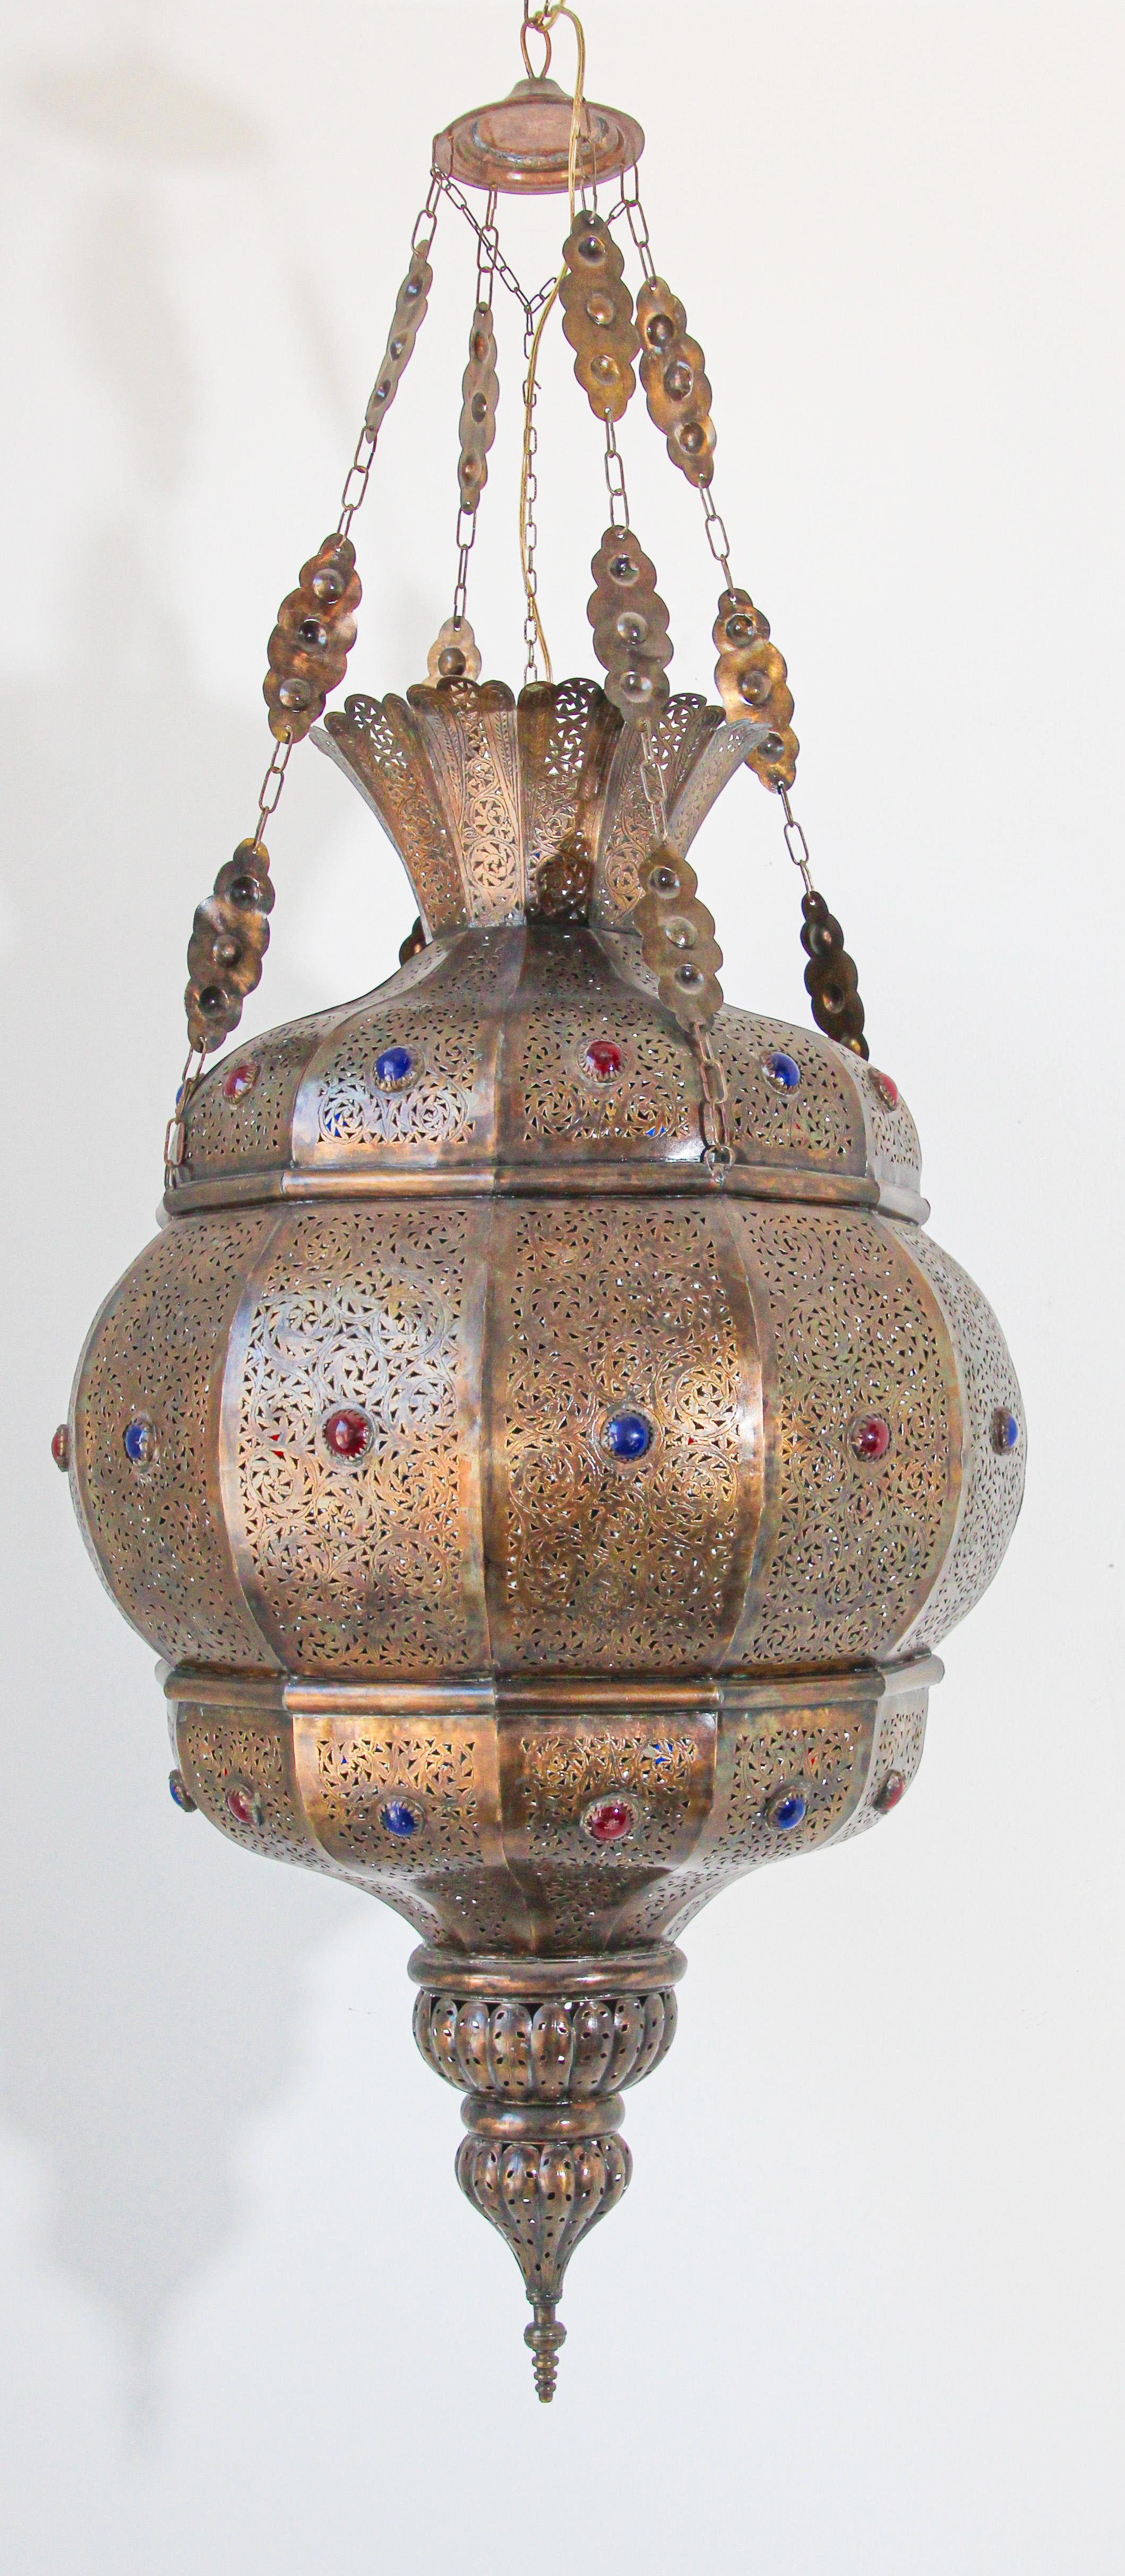 Elegant Moroccan Granada Moorish style brass chandelier with colored glass inset.
Handcrafted in Morocco with very fine filigree openwork brass design and inlaid with colored jeweled glass.
The light fixture when lit will give thousands of shadow